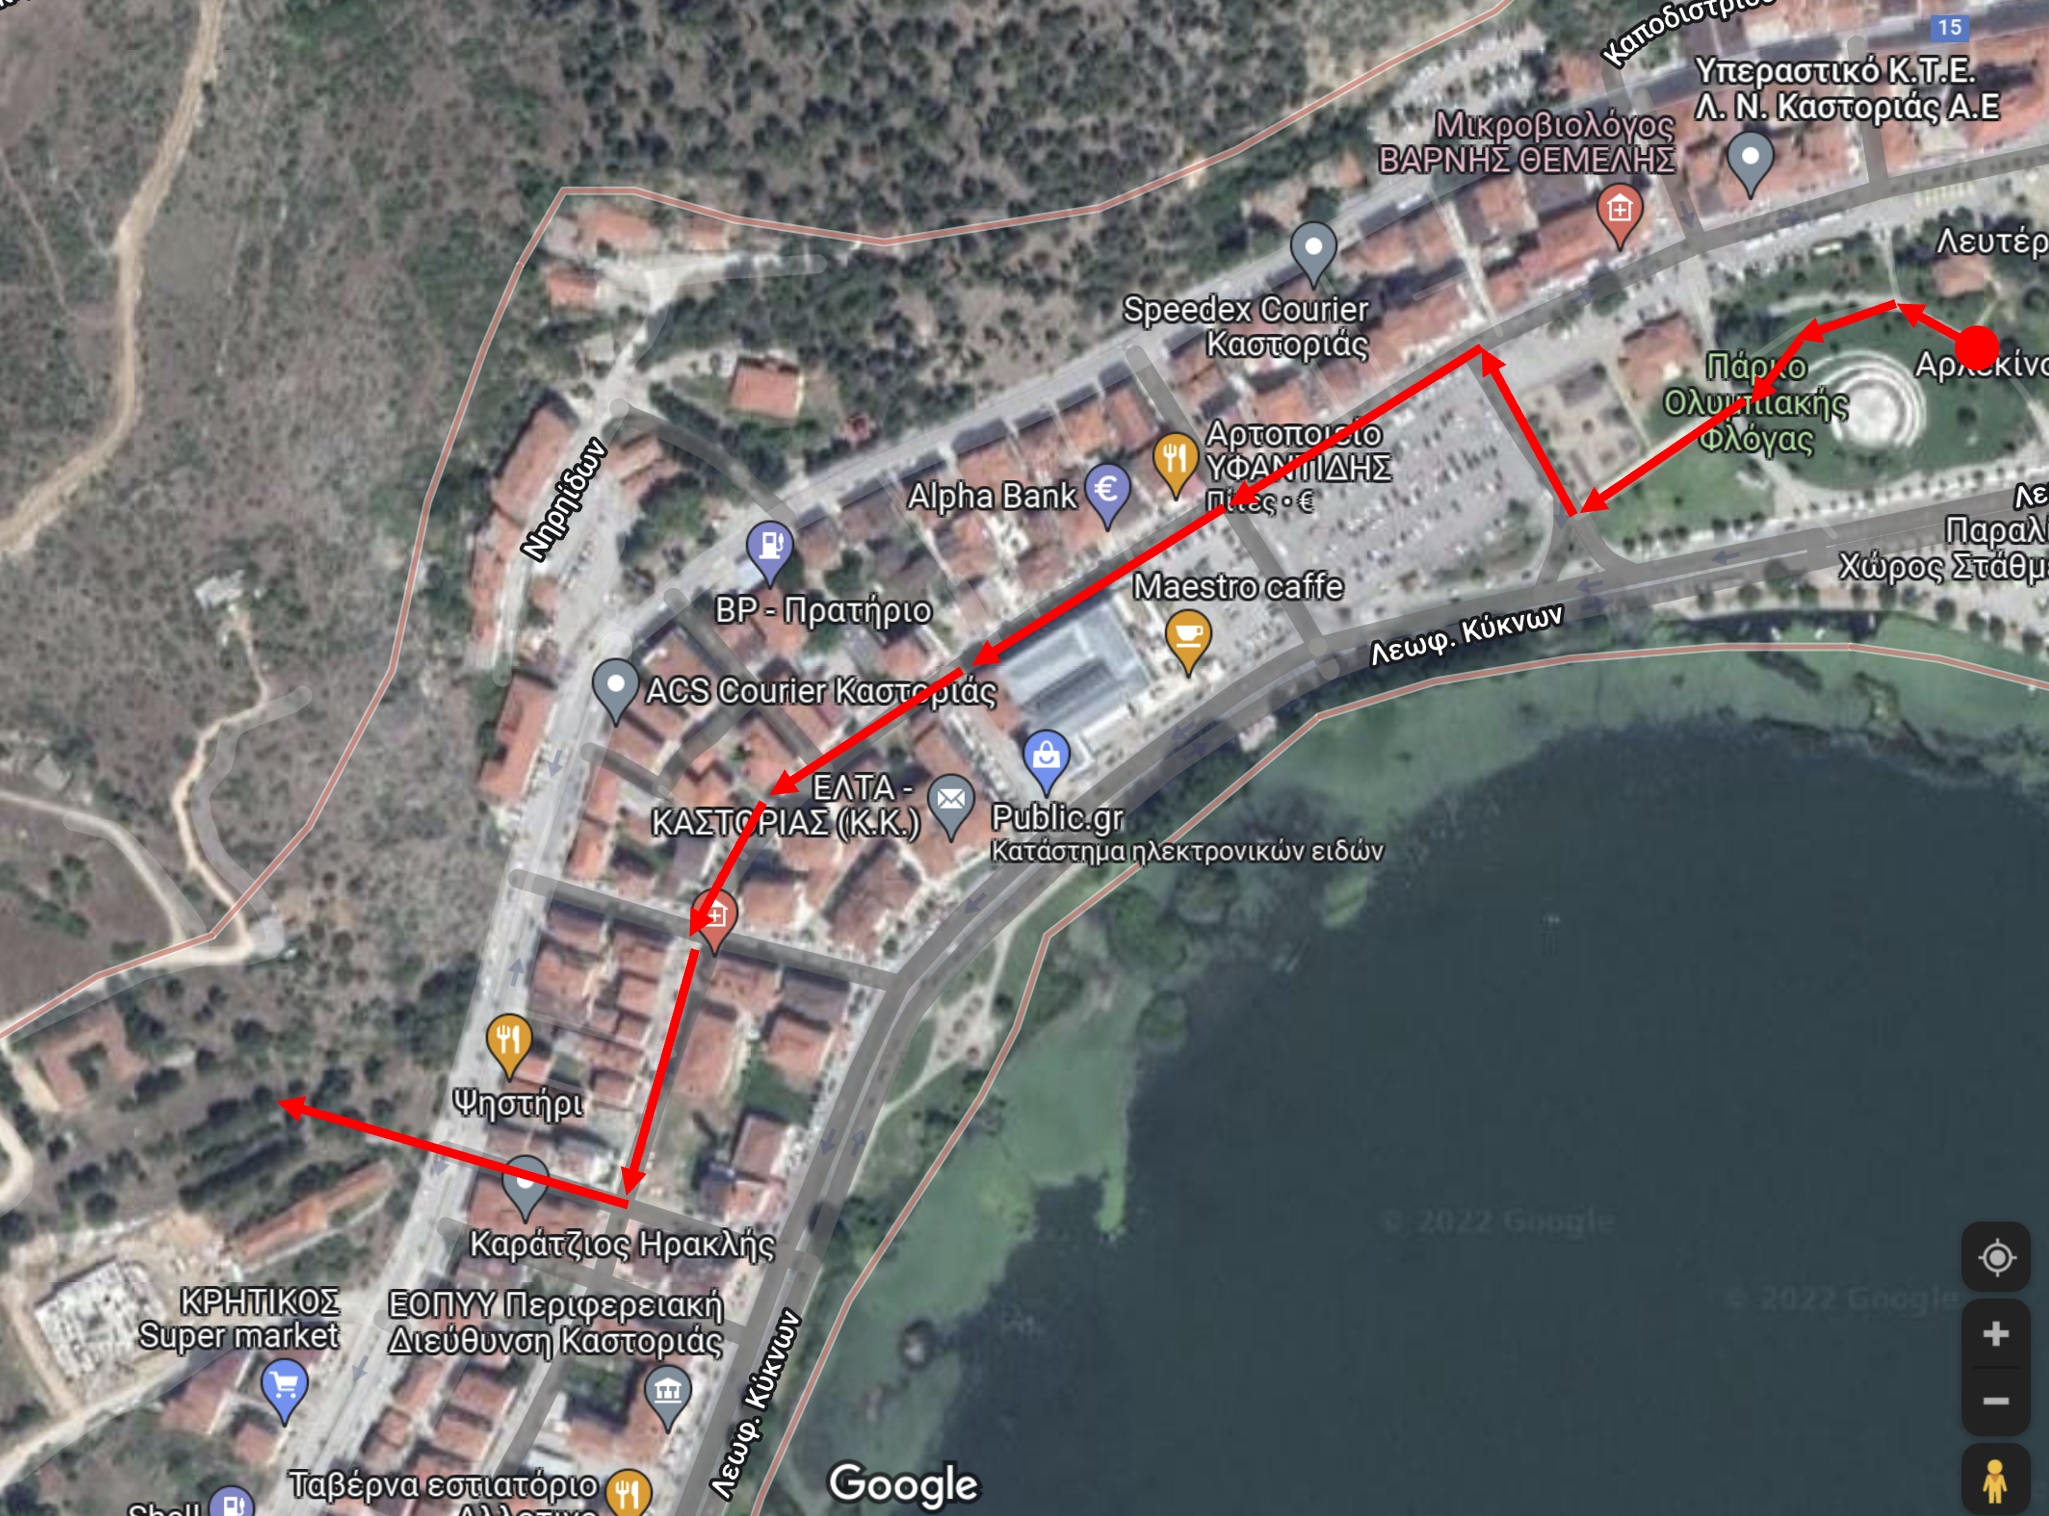 Kastoria Trail Running map in the city